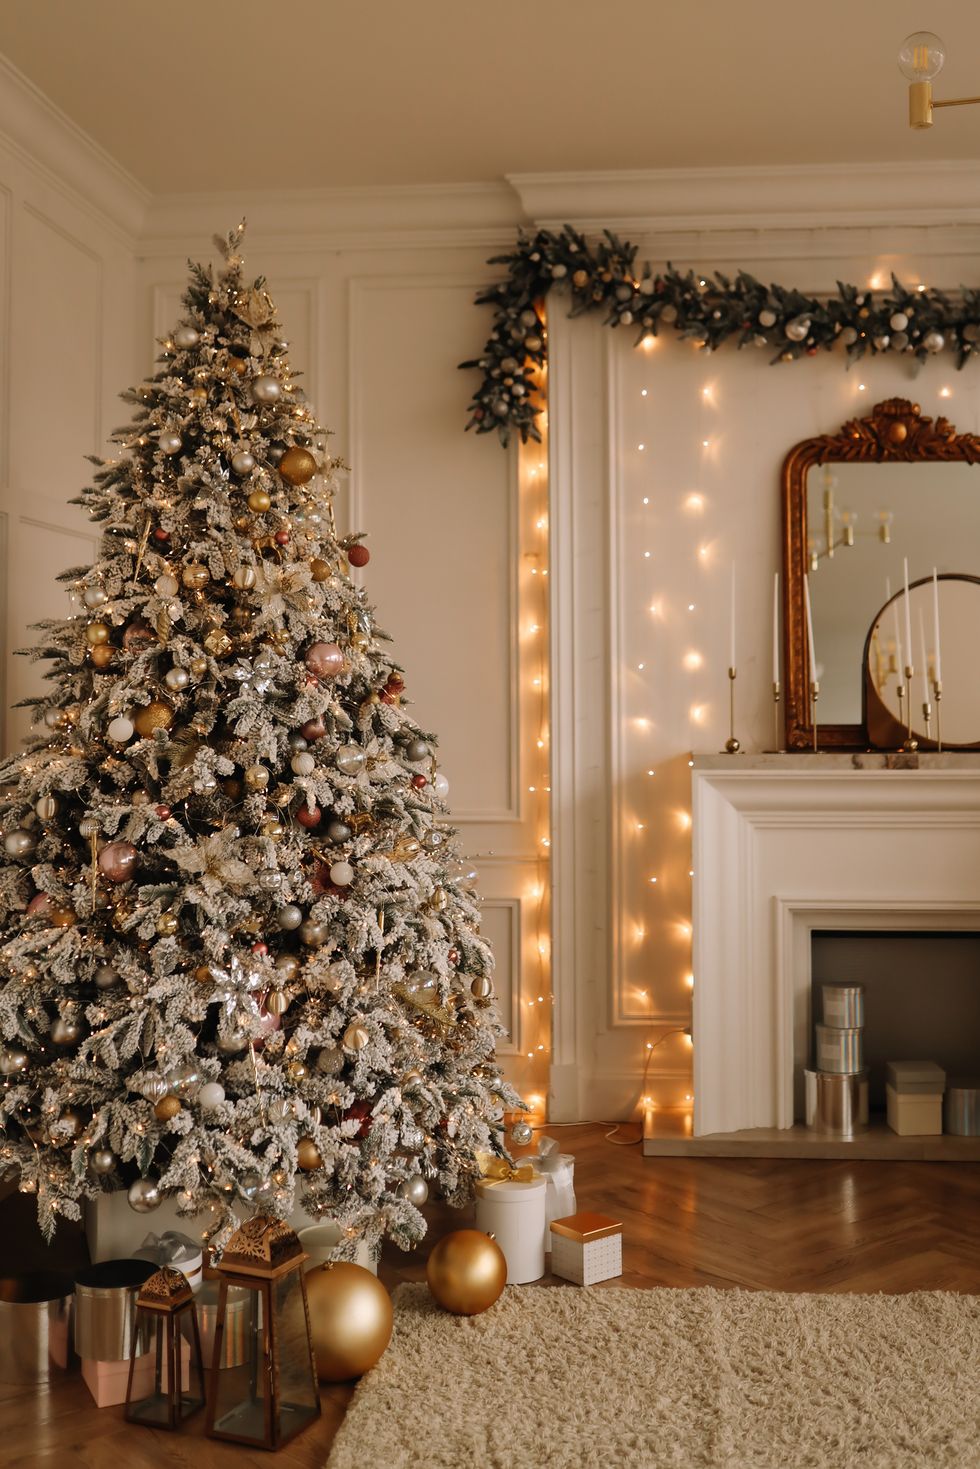 Christmas concept is a festive Christmas rich interior in luxury modern style with fireplace, decorated with Christmas balls and Christmas tree garlands in a large bright living room of an apartment on winter New Year's Eve.